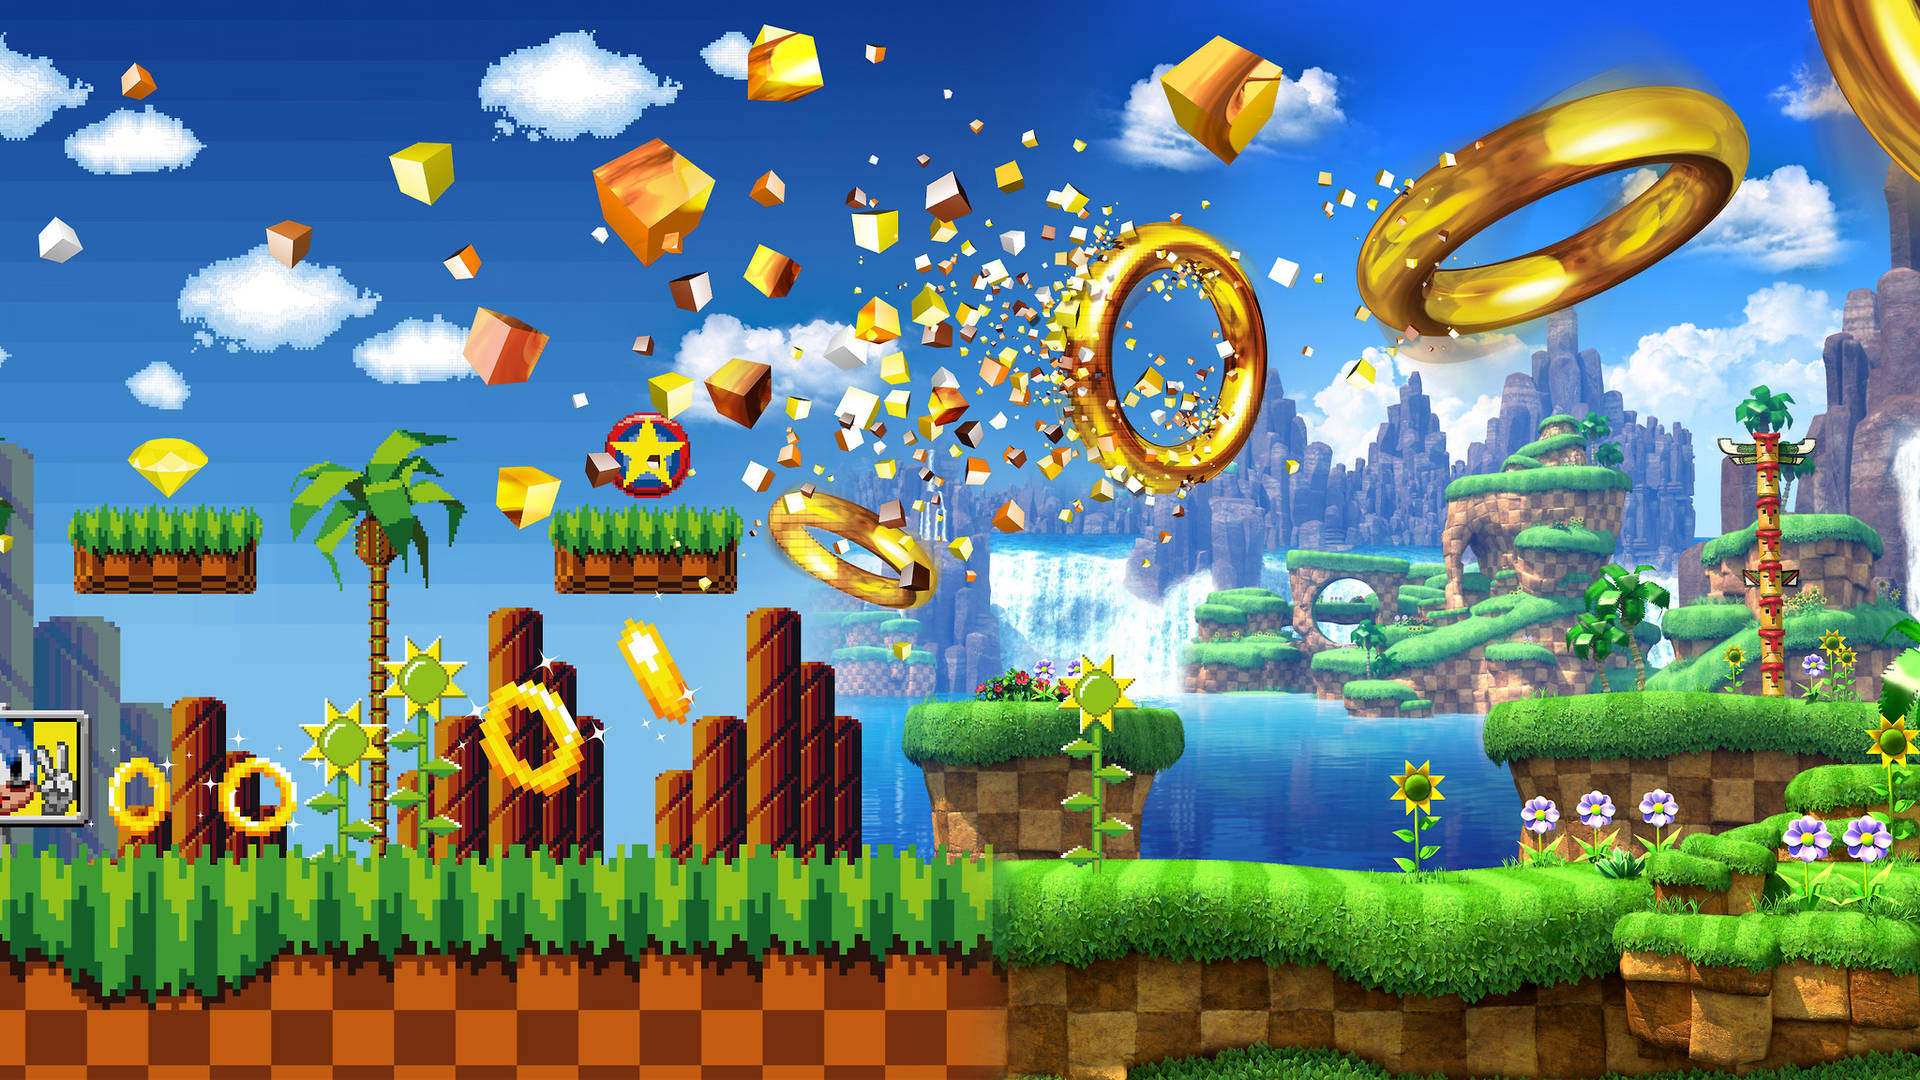 100+] Green Hill Zone Background s 